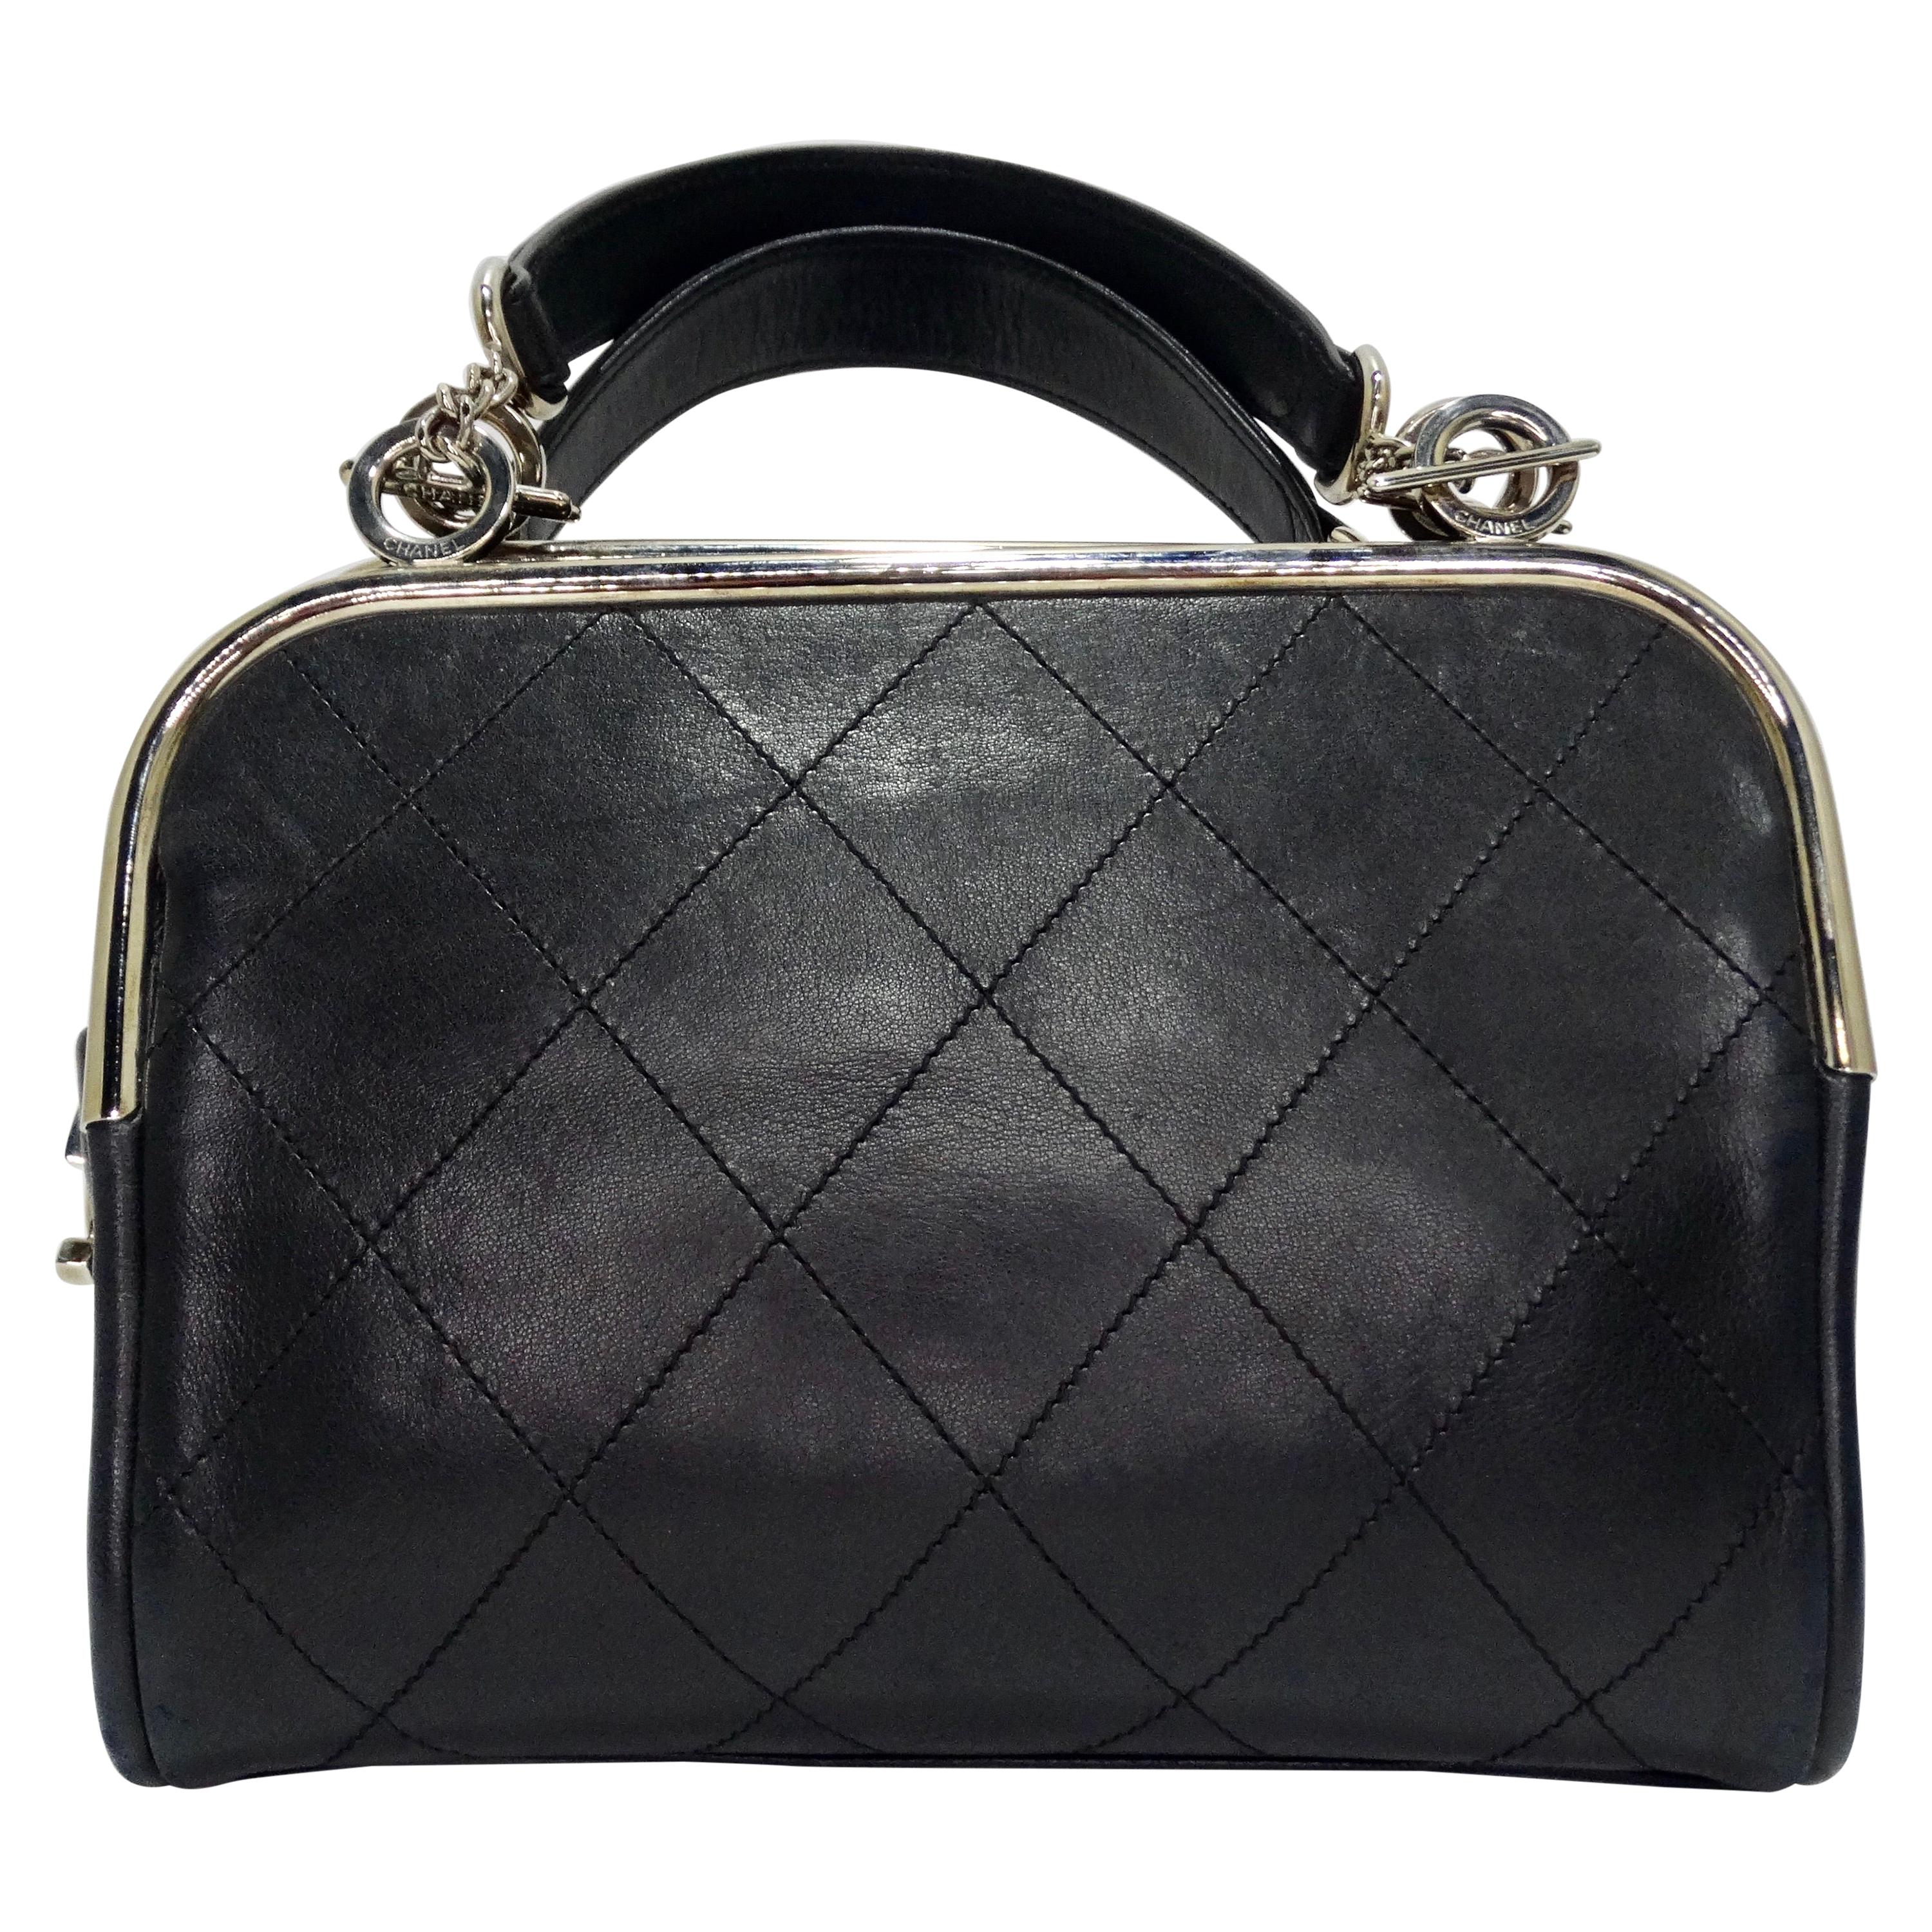 Chanel Black Quilted Leather Top Handle Bag